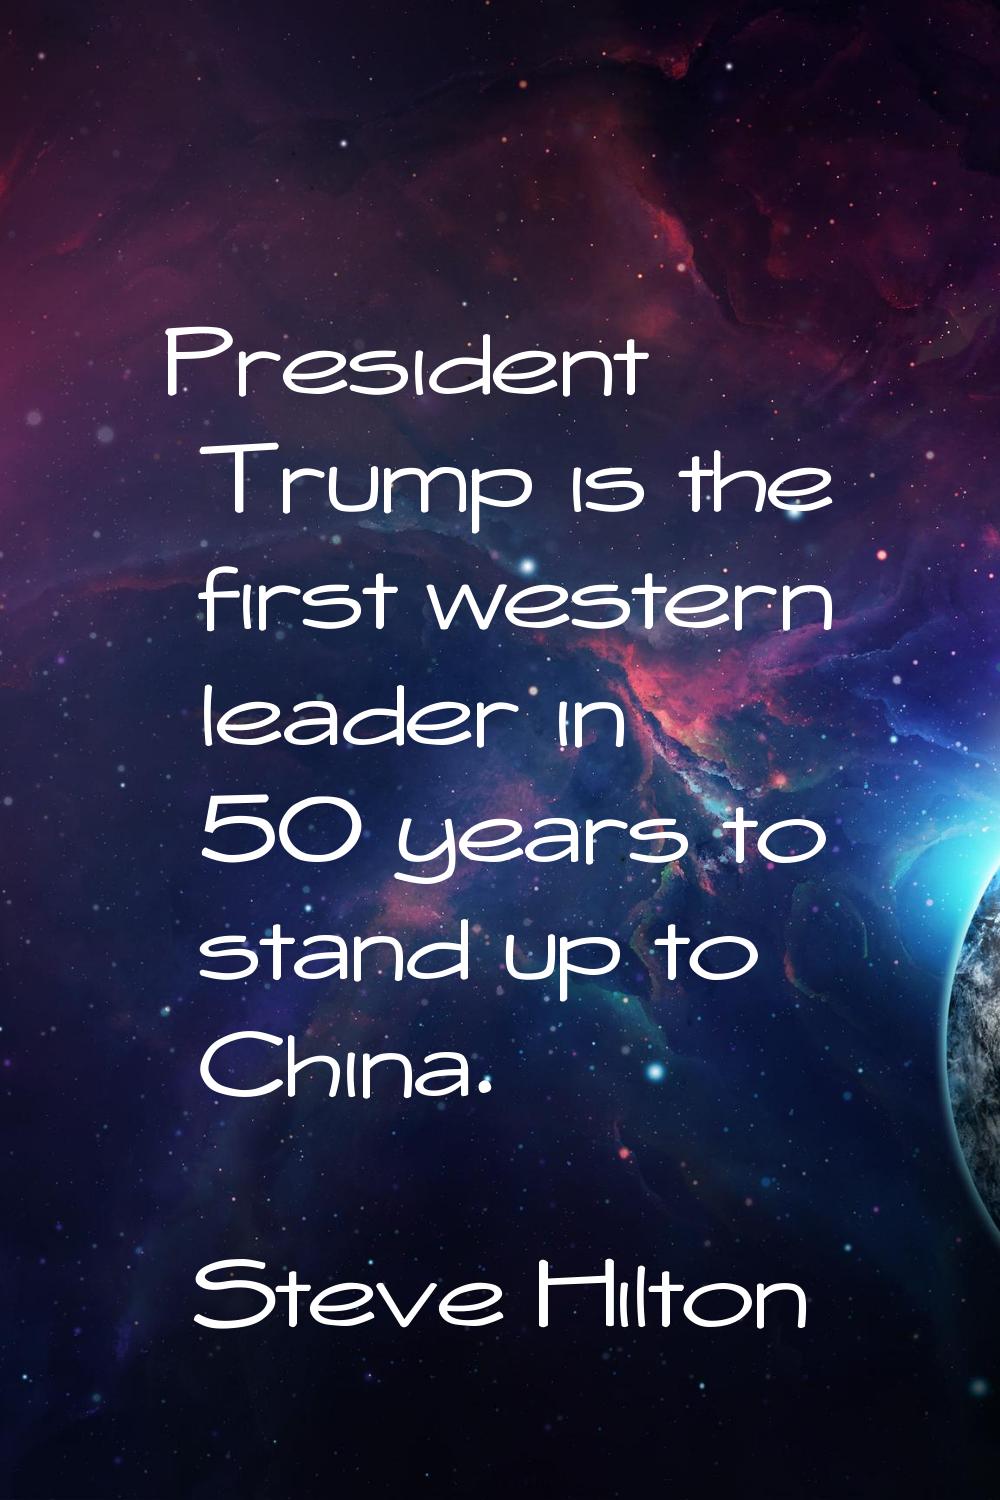 President Trump is the first western leader in 50 years to stand up to China.